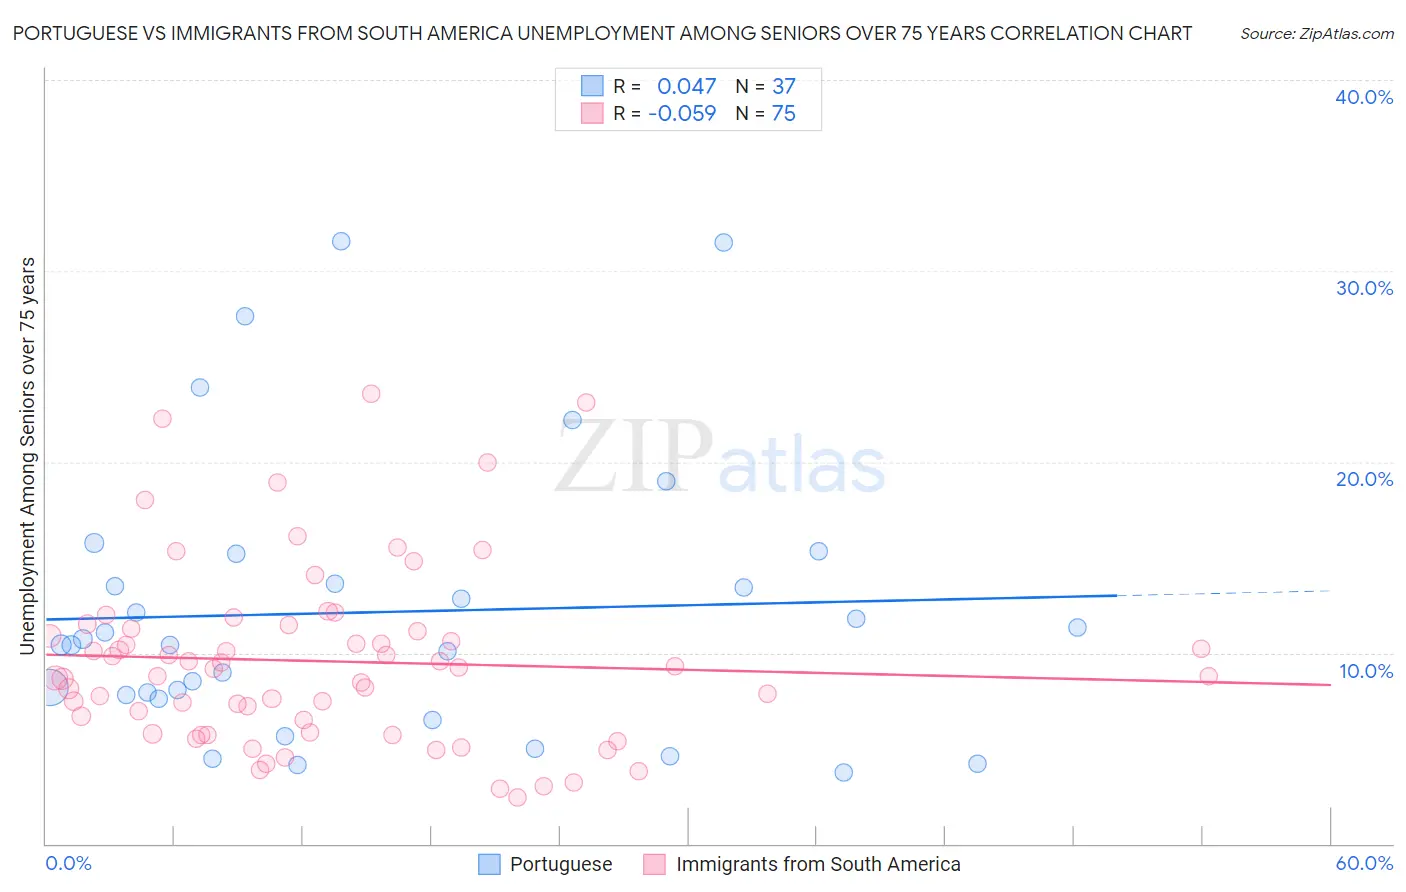 Portuguese vs Immigrants from South America Unemployment Among Seniors over 75 years